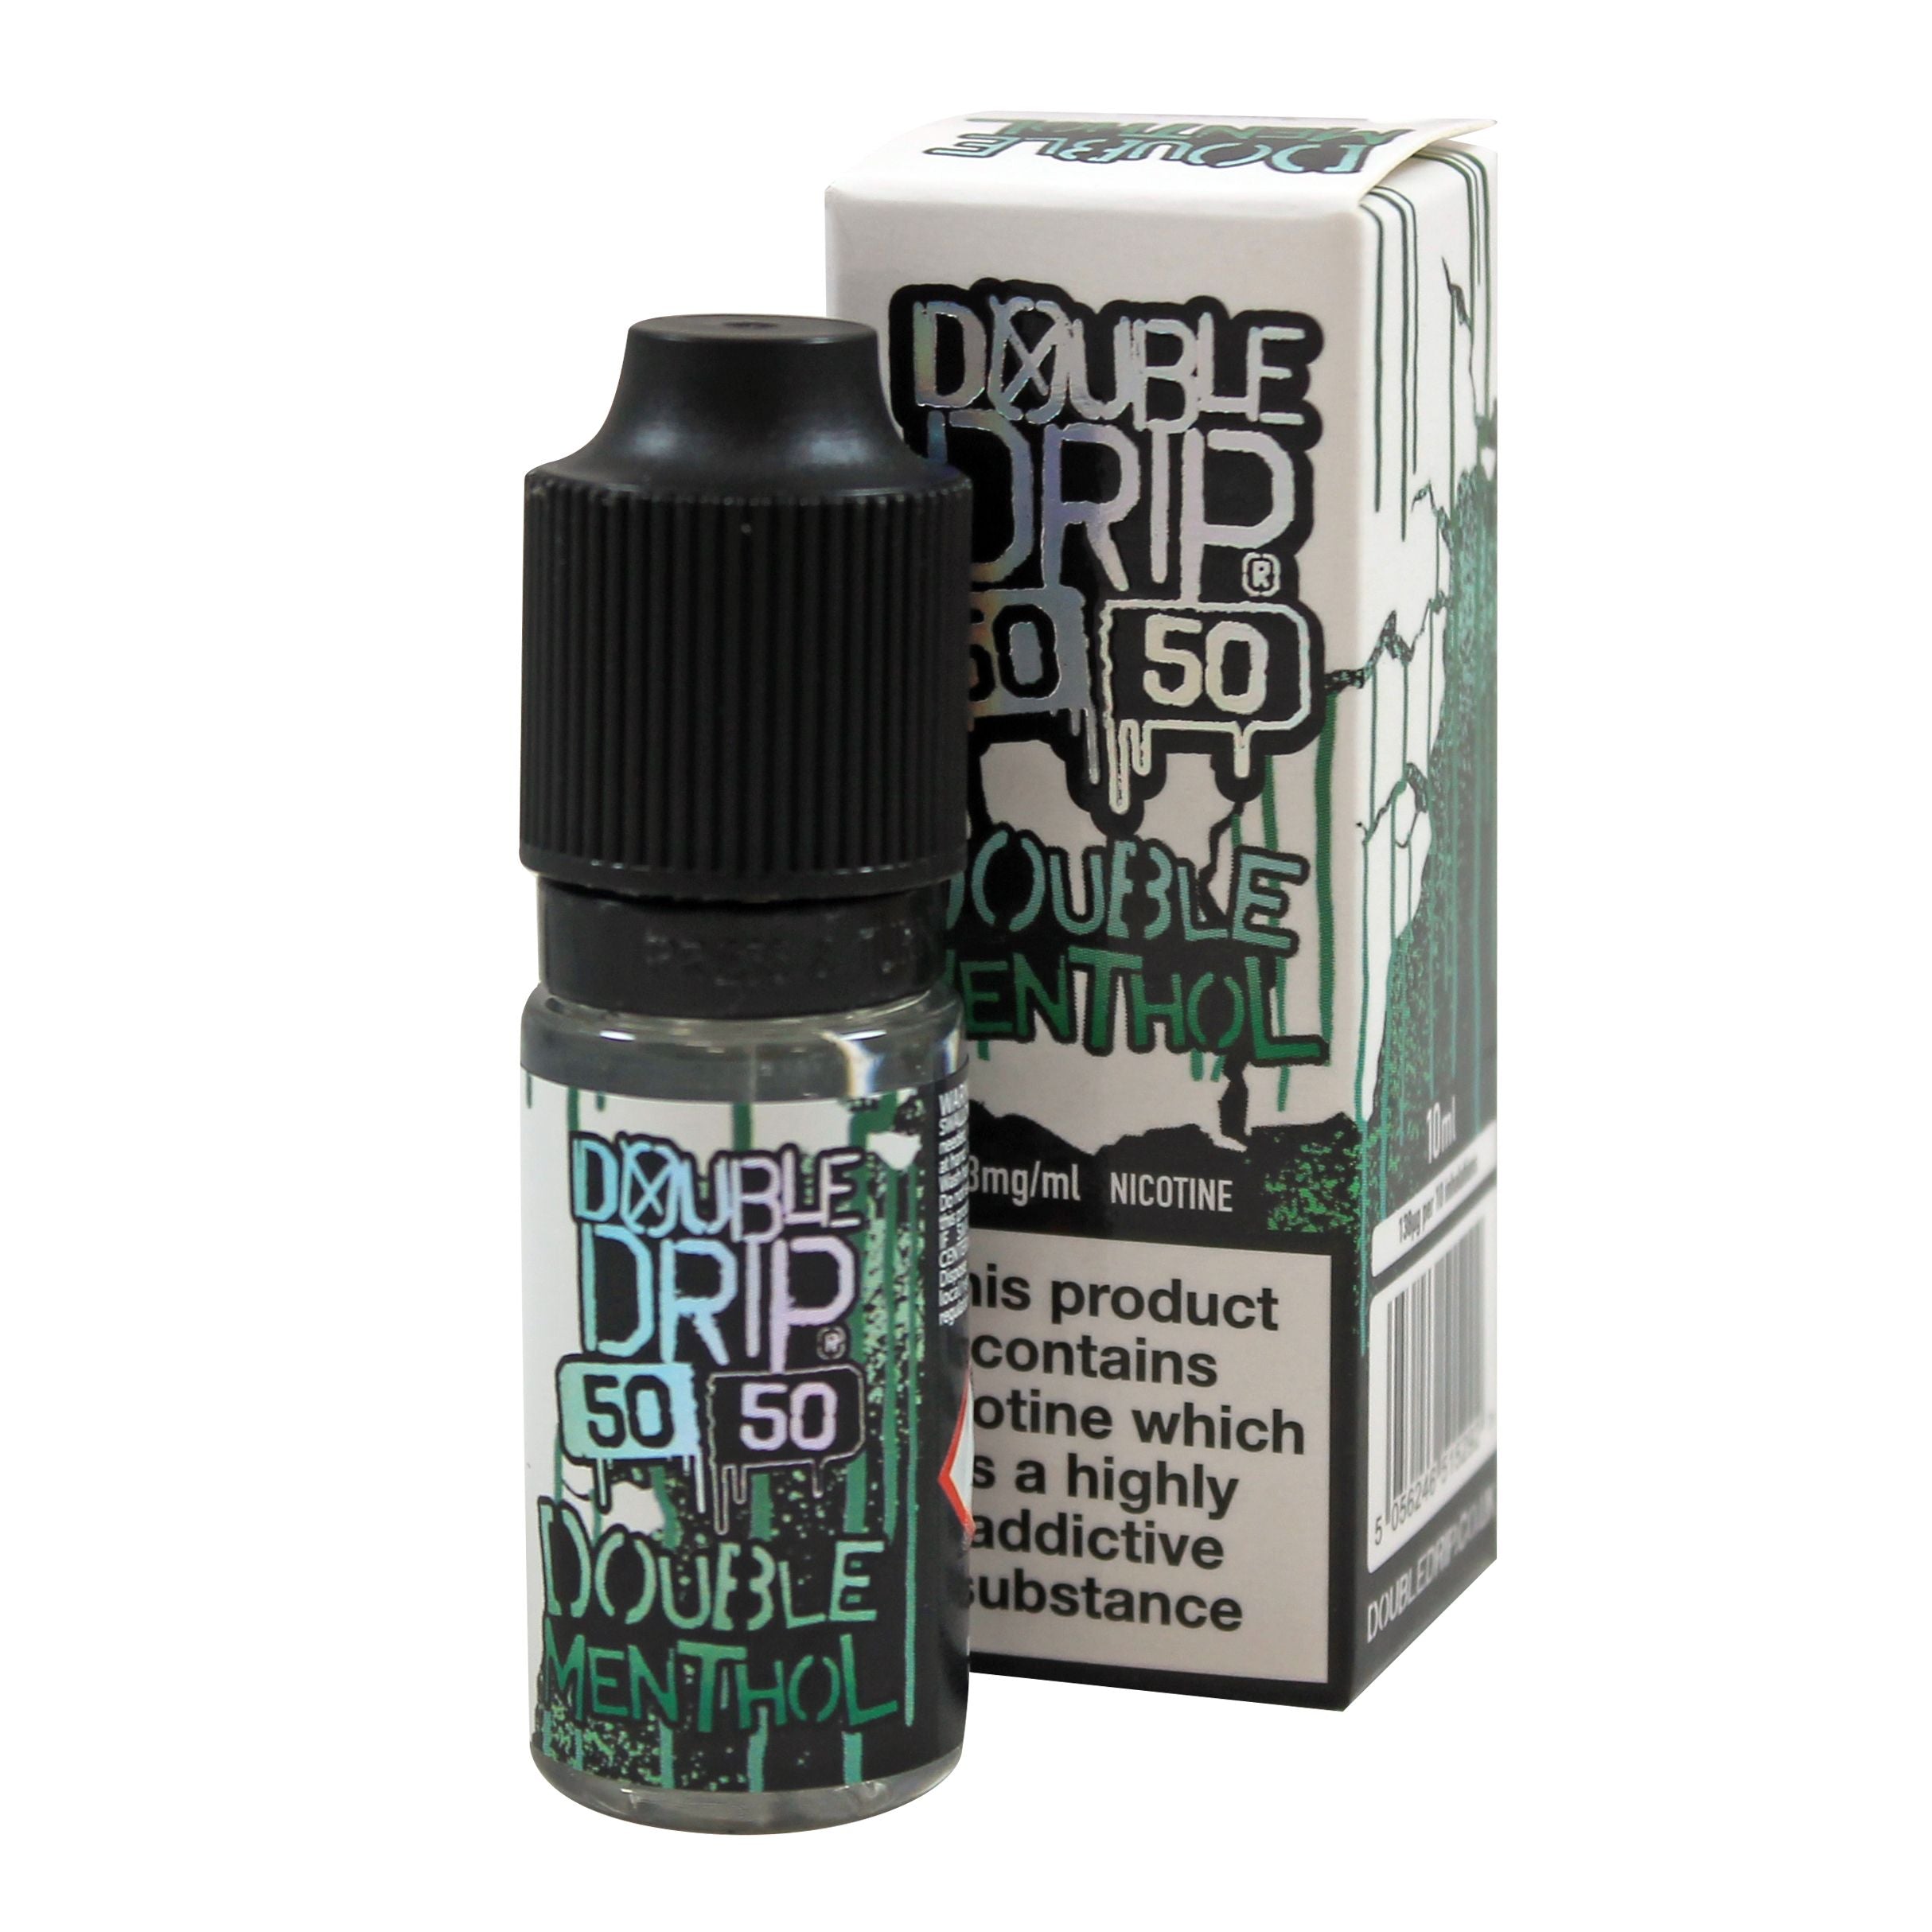 Double Drip 50:50 Double Menthol 10ml-12mg